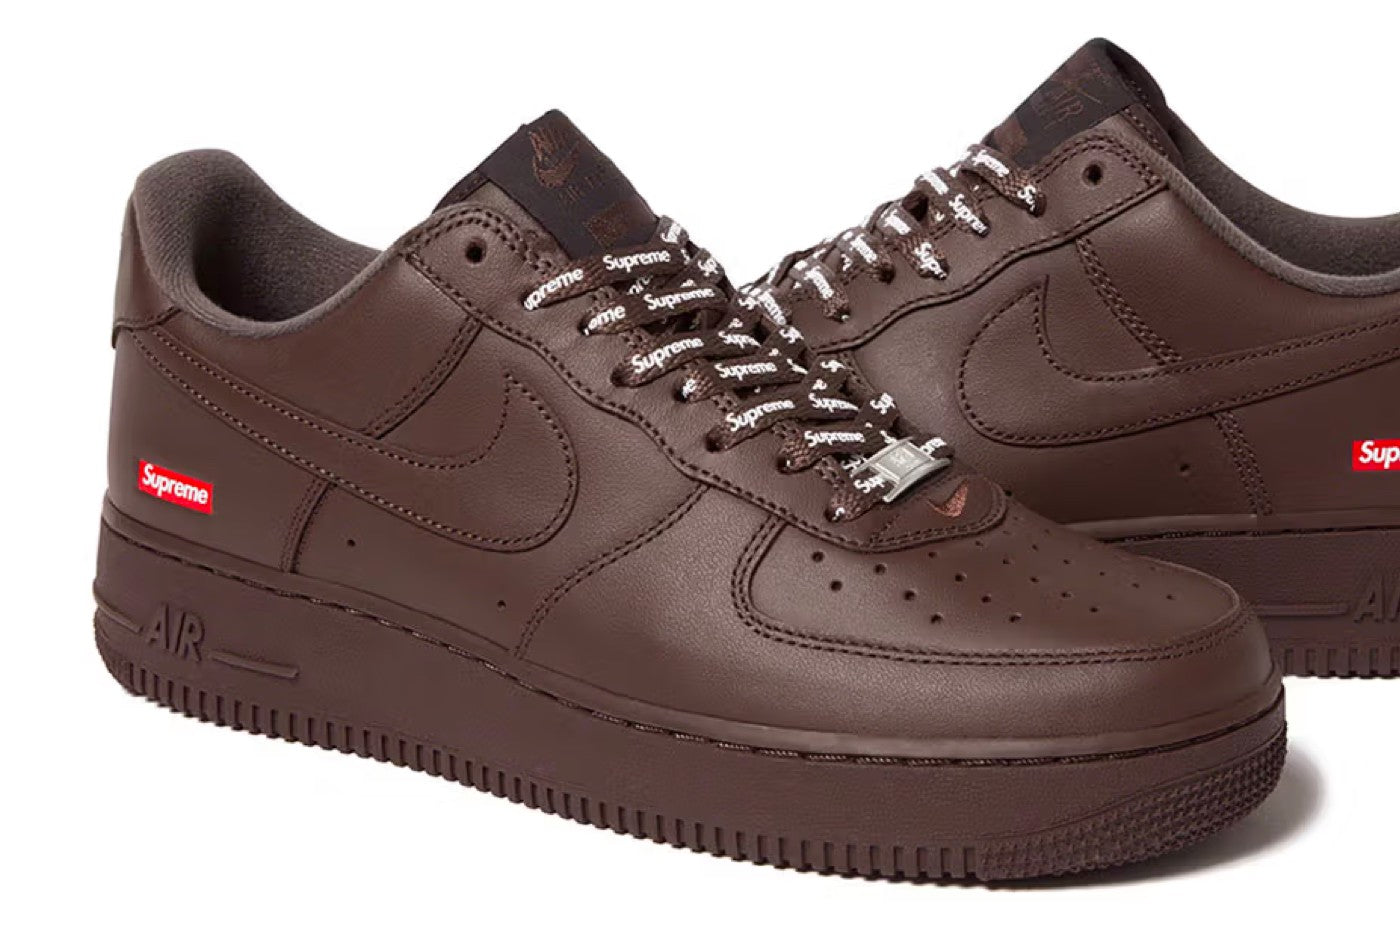 The Supreme x Nike Air Force 1 "Baroque Brown" Has Finally Been Confirmed